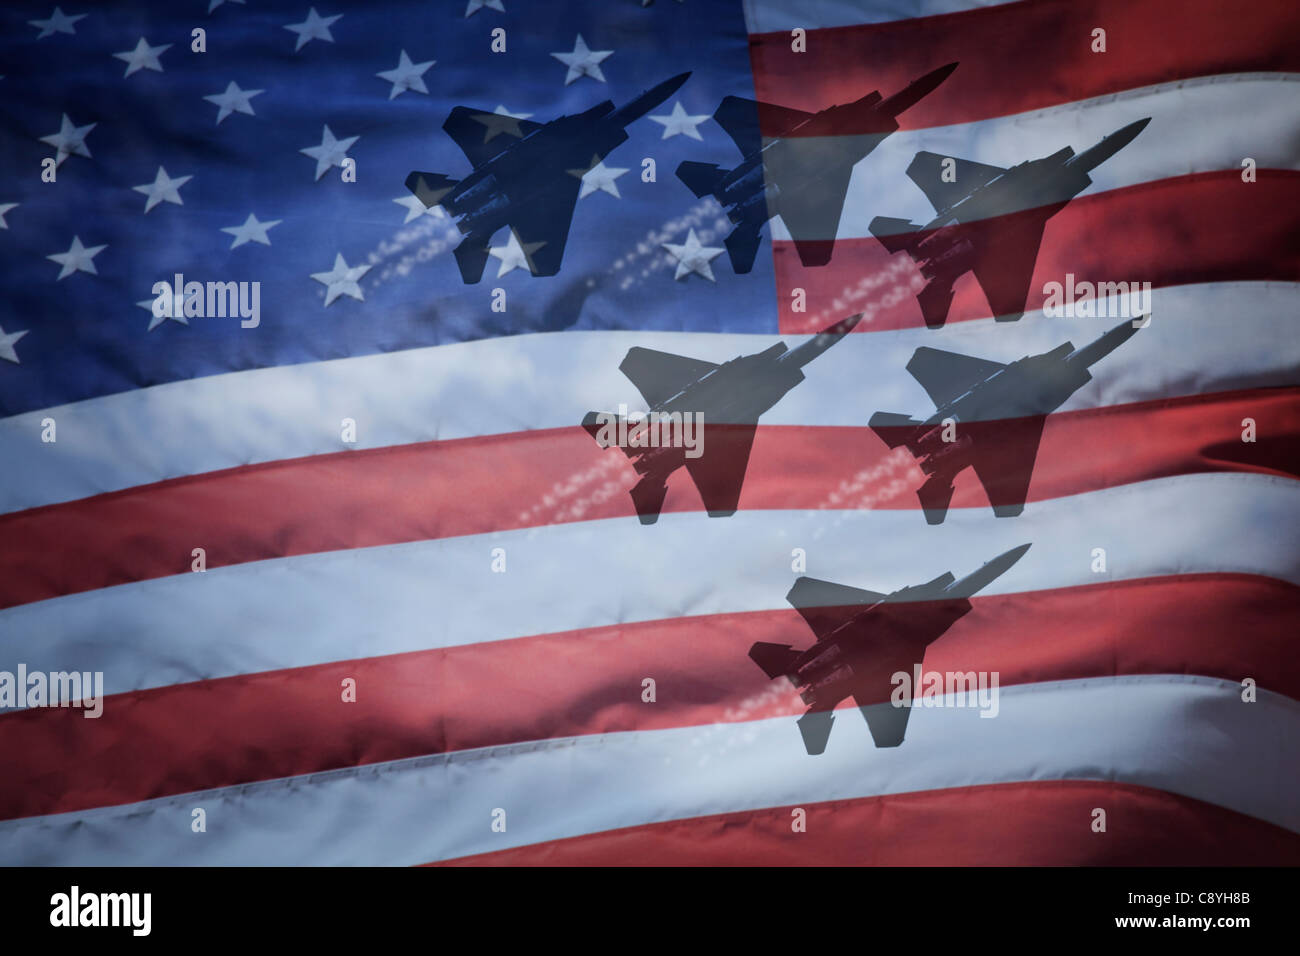 Close-up of American flag with silhouettes of F-16 airplanes Stock